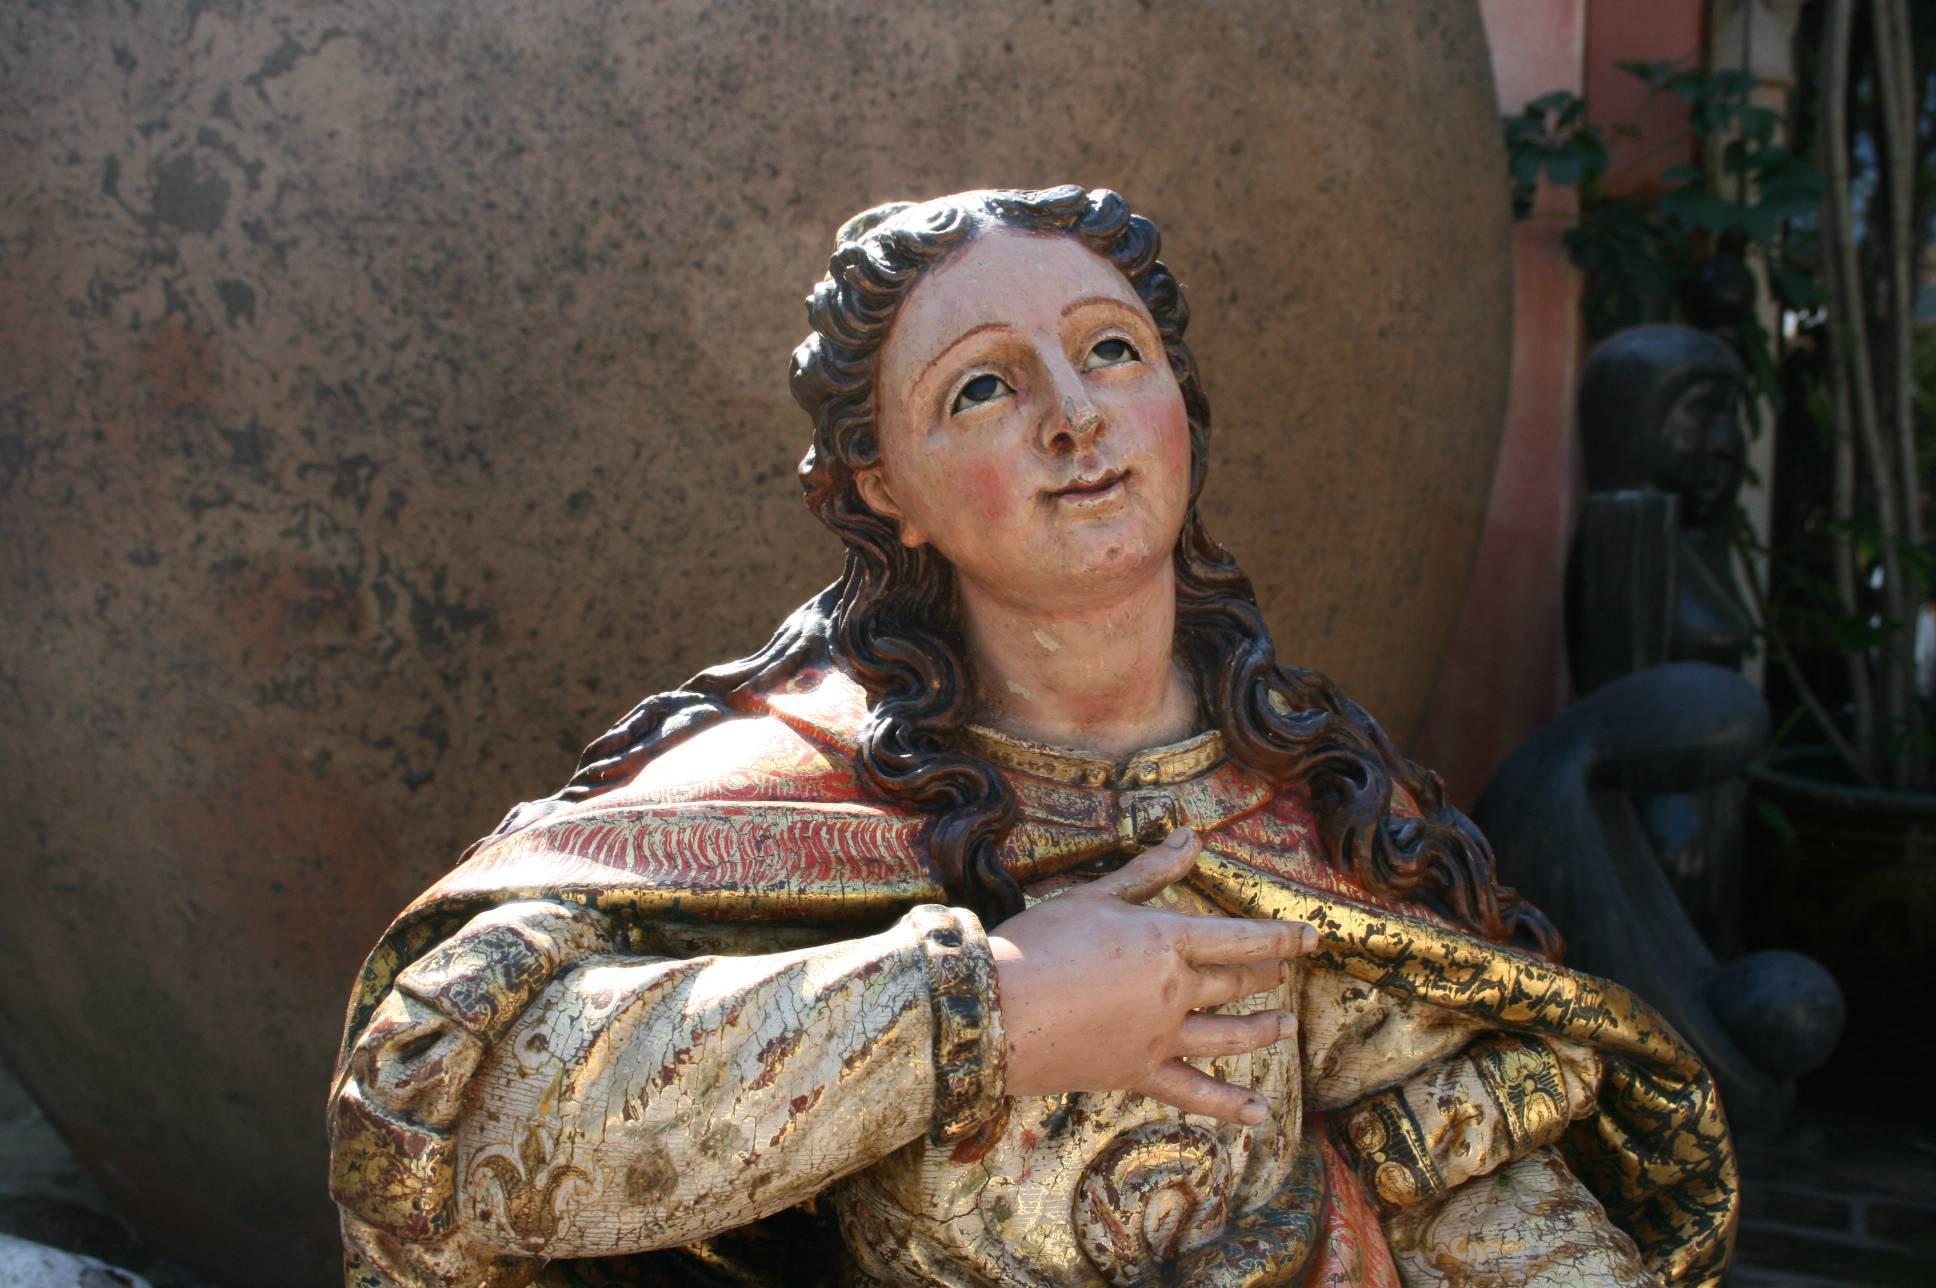 Spanish Polychrome Sculpture of the 17th Century, from the Castilian Area